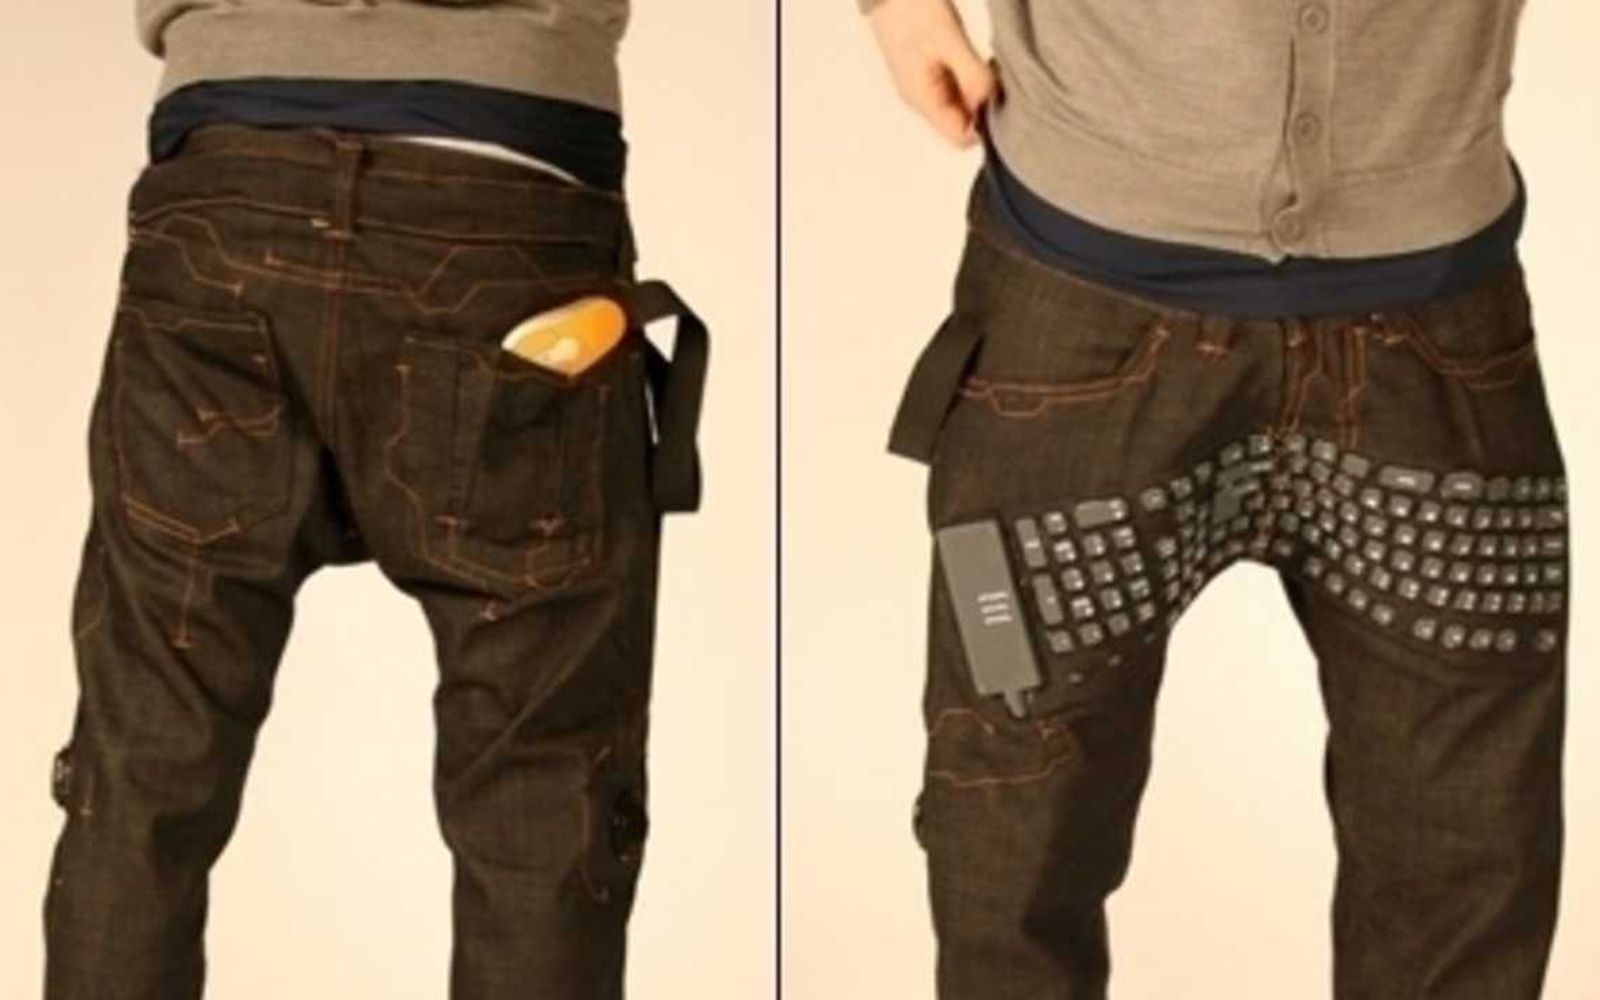 27 crazy inventions you won t believe what you re about to see image 6